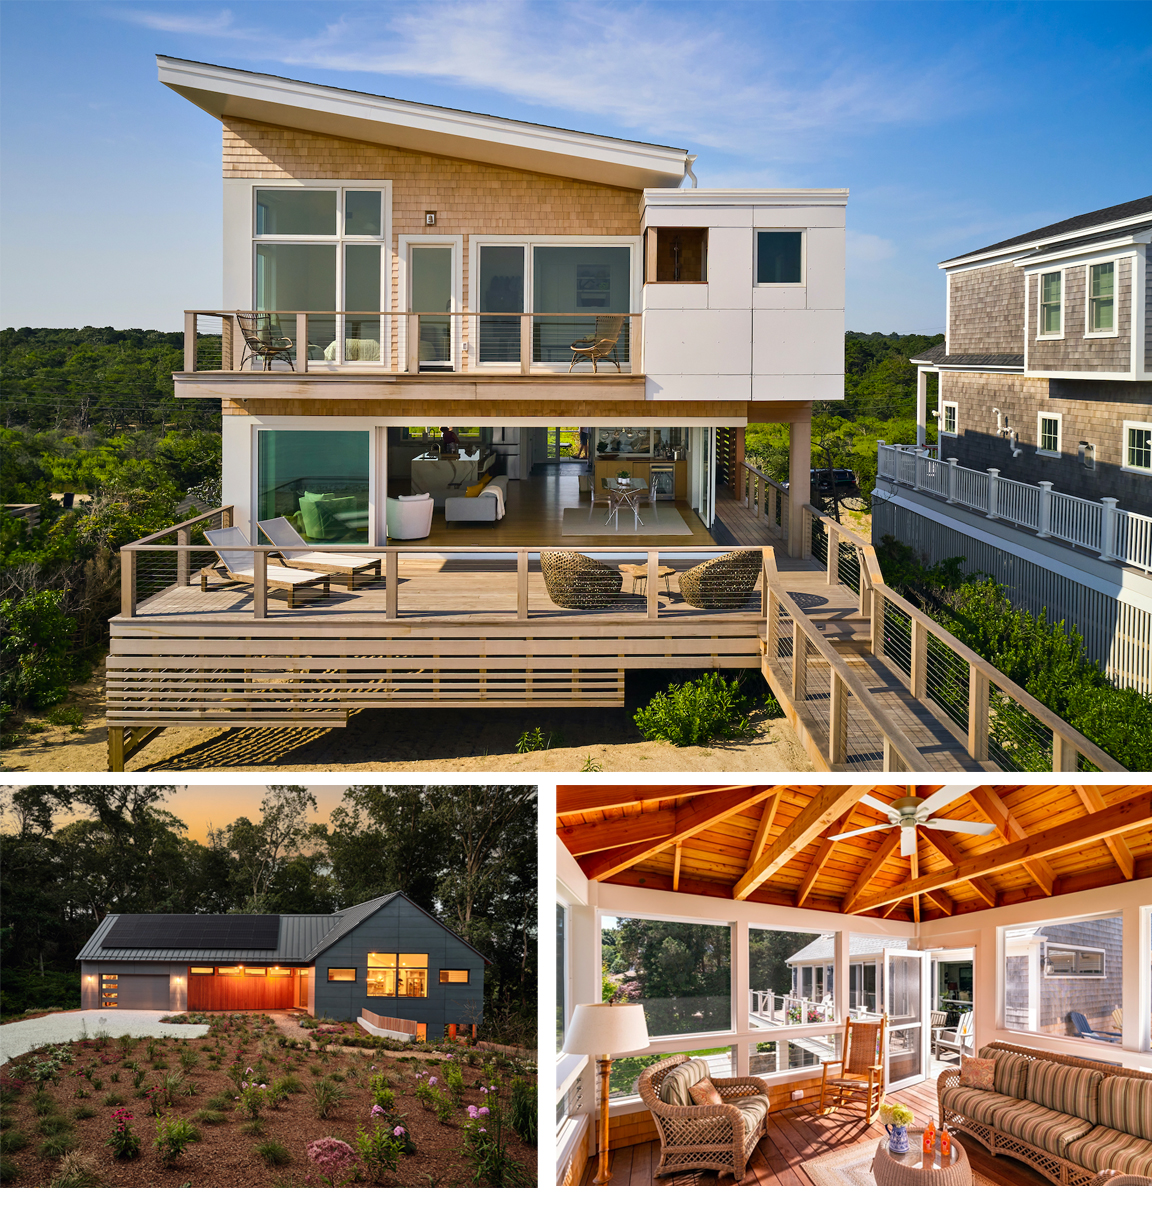 Award winning custom homes by Cape Cod builder The Valle Group